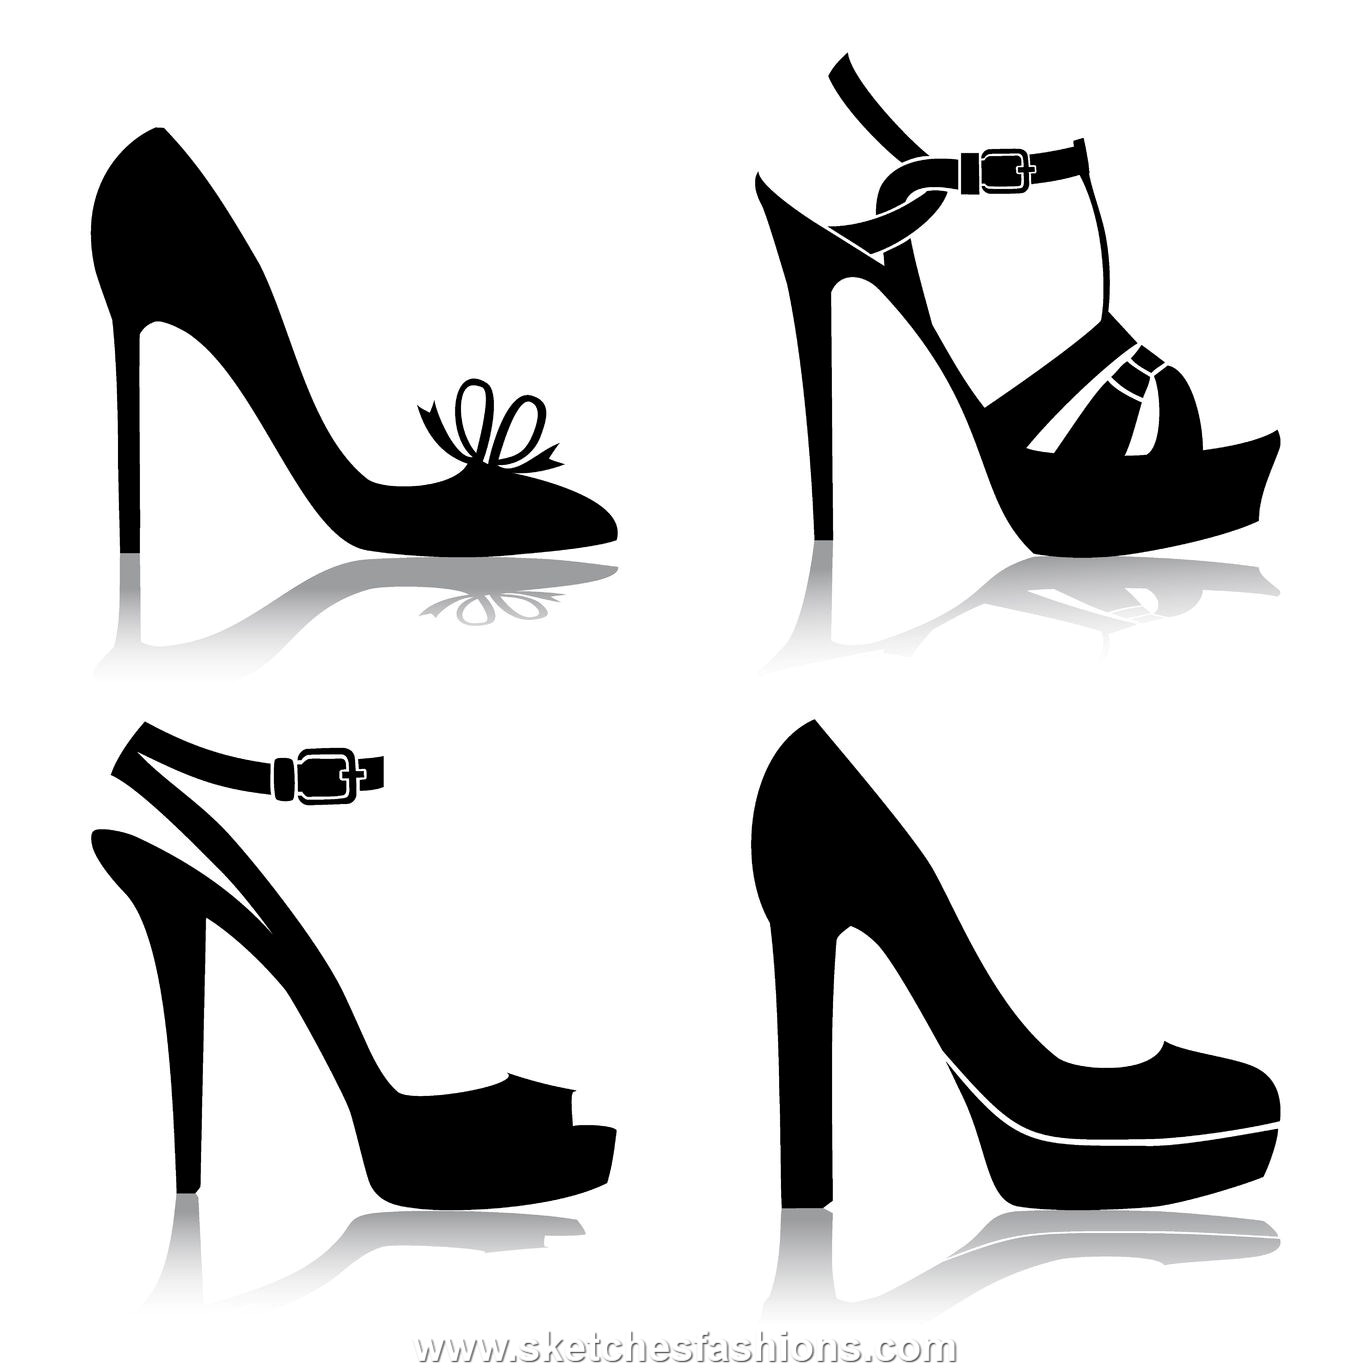 High Heel Shoe Style Sketches   Sketches Fashions